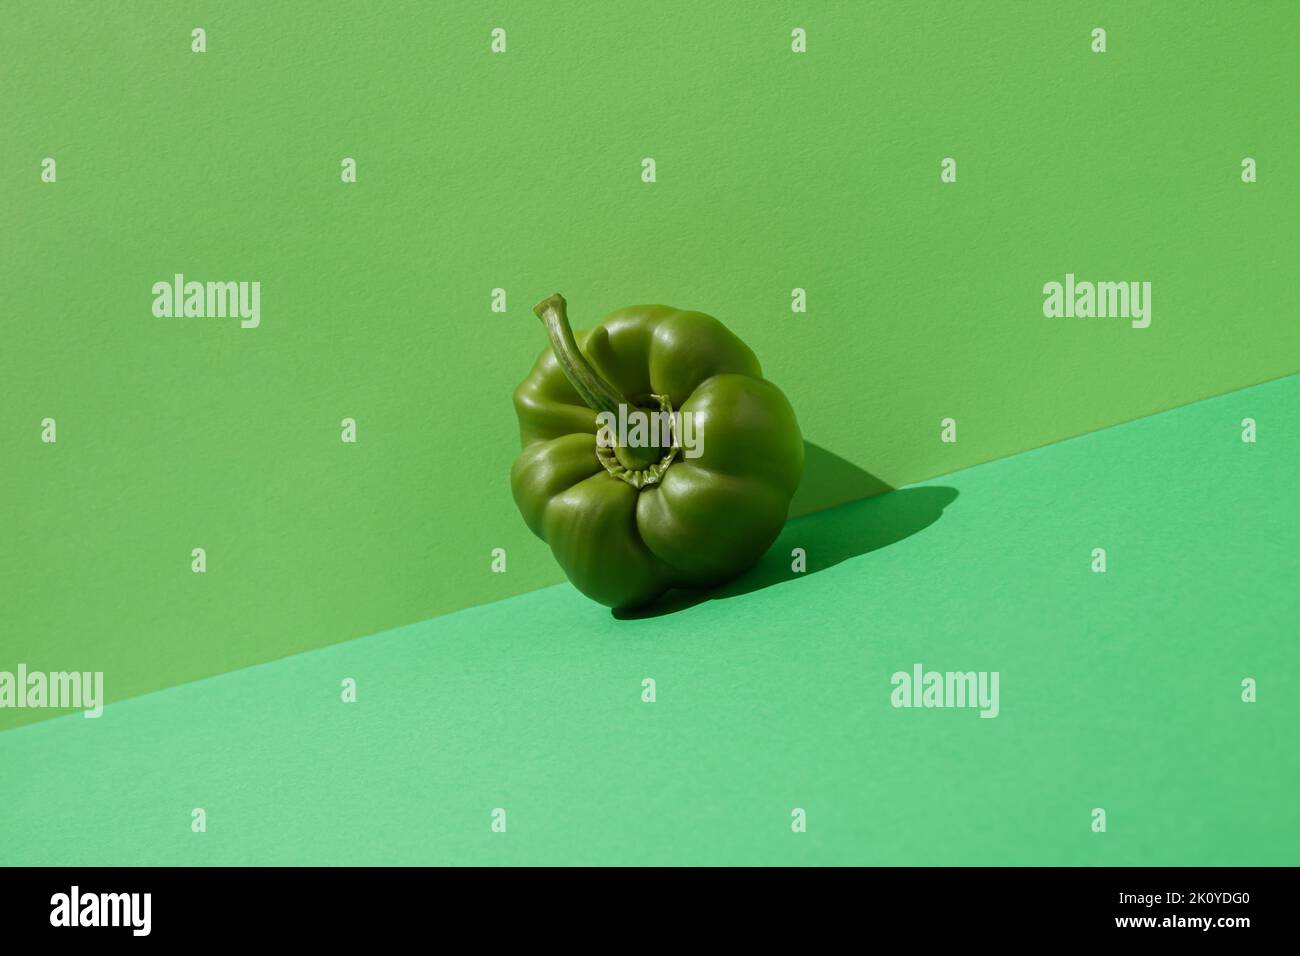 Fresh green pepper on green background. Tilted angle view. Minimal concept. Stock Photo